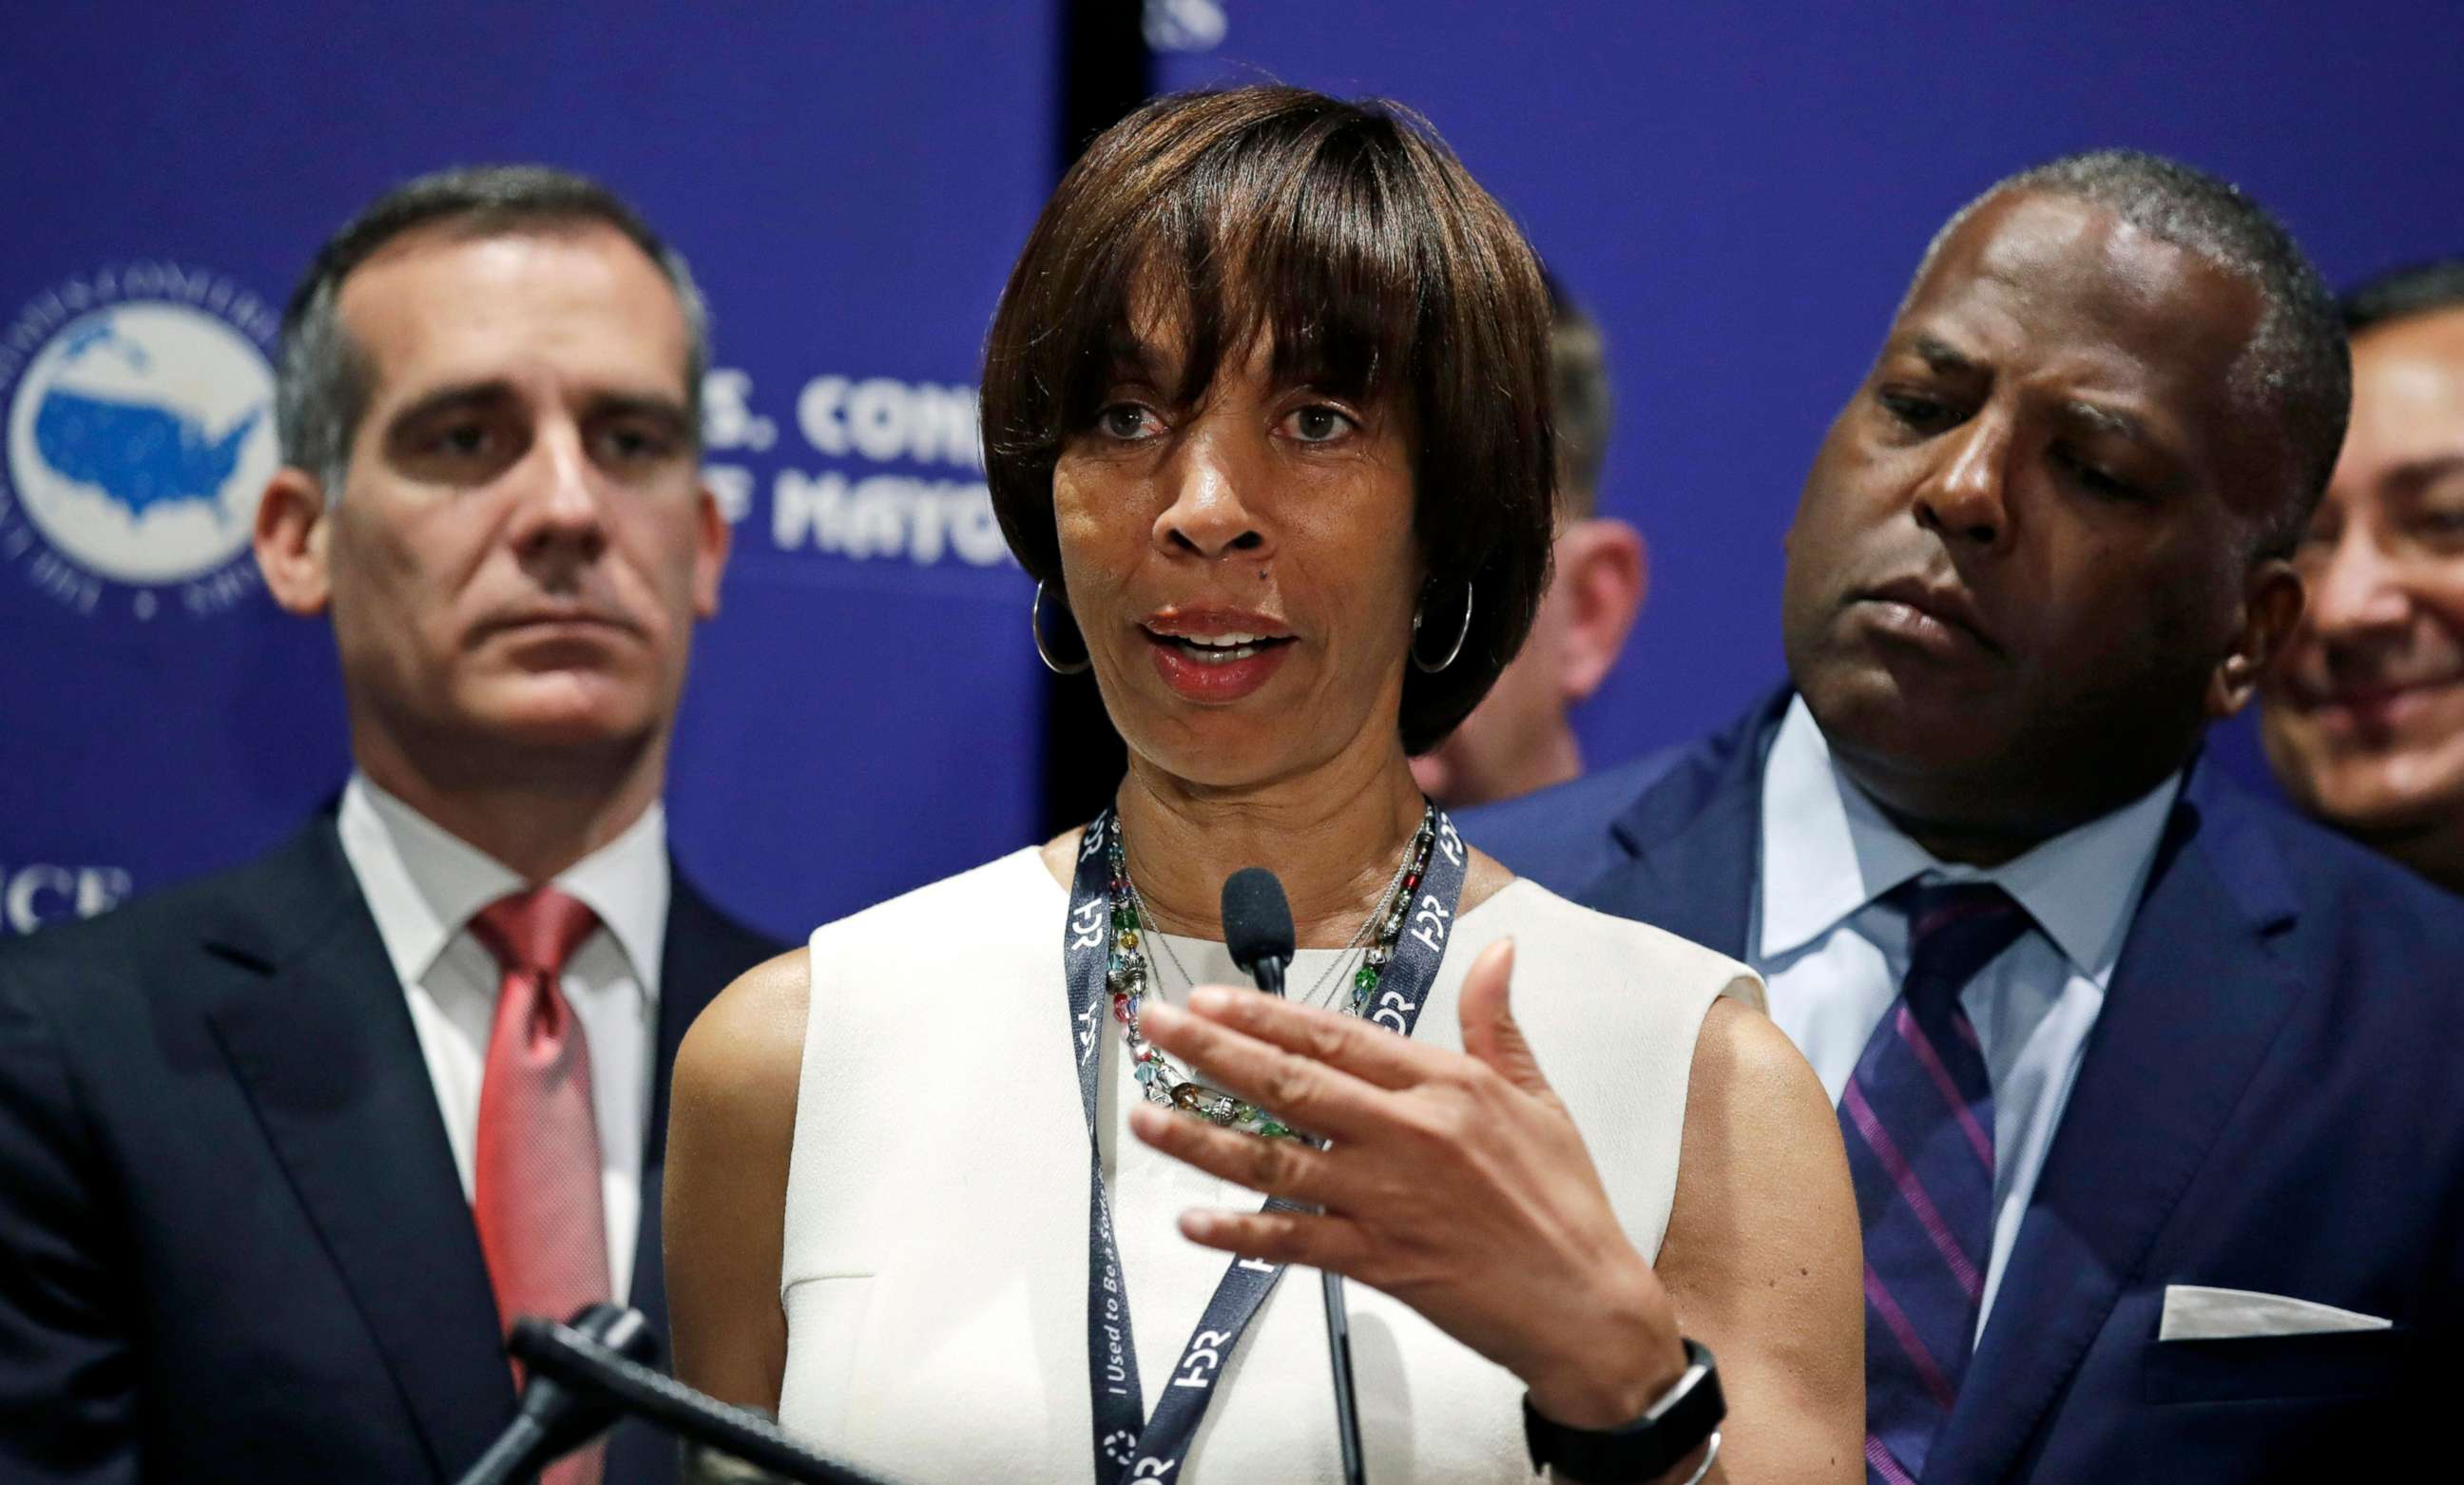 PHOTO: Baltimore Mayor Catherine Pugh addresses a gathering during the annual meeting of the U.S. Conference of Mayors in Boston, June 8, 2018. 